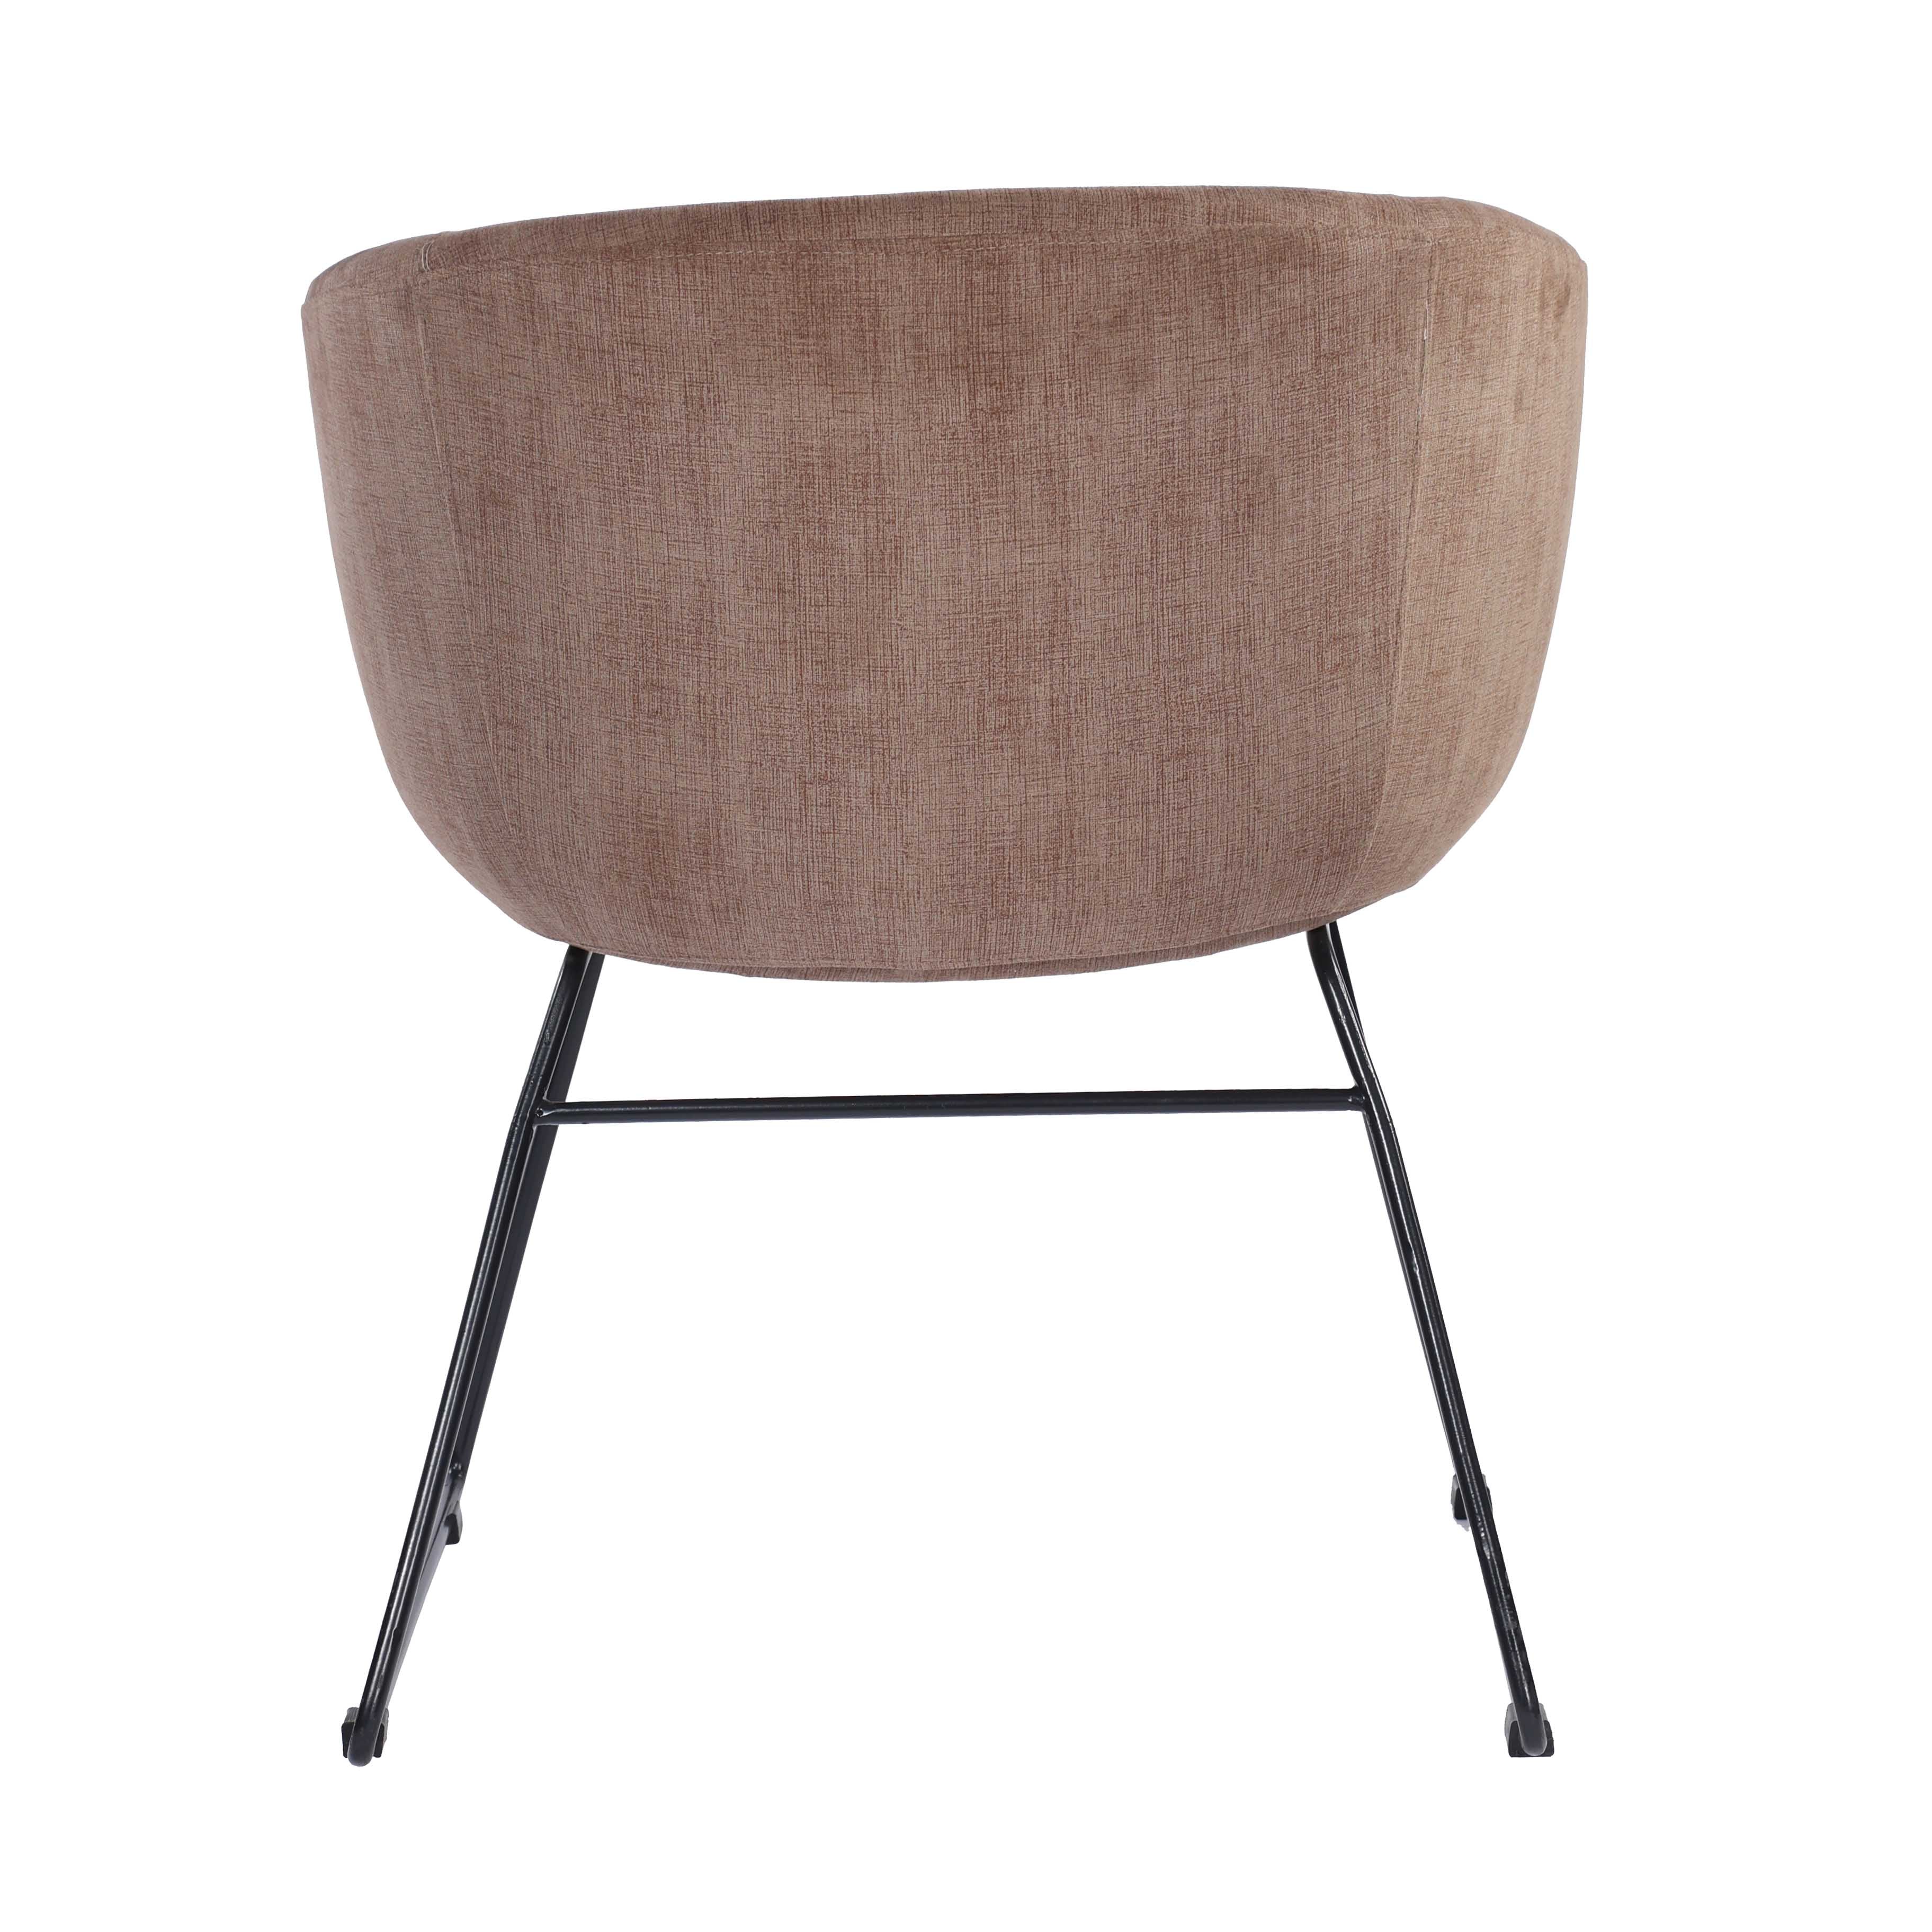 Emilia Fabric Lounge Armchair With Stainless Steel Legs - Brown